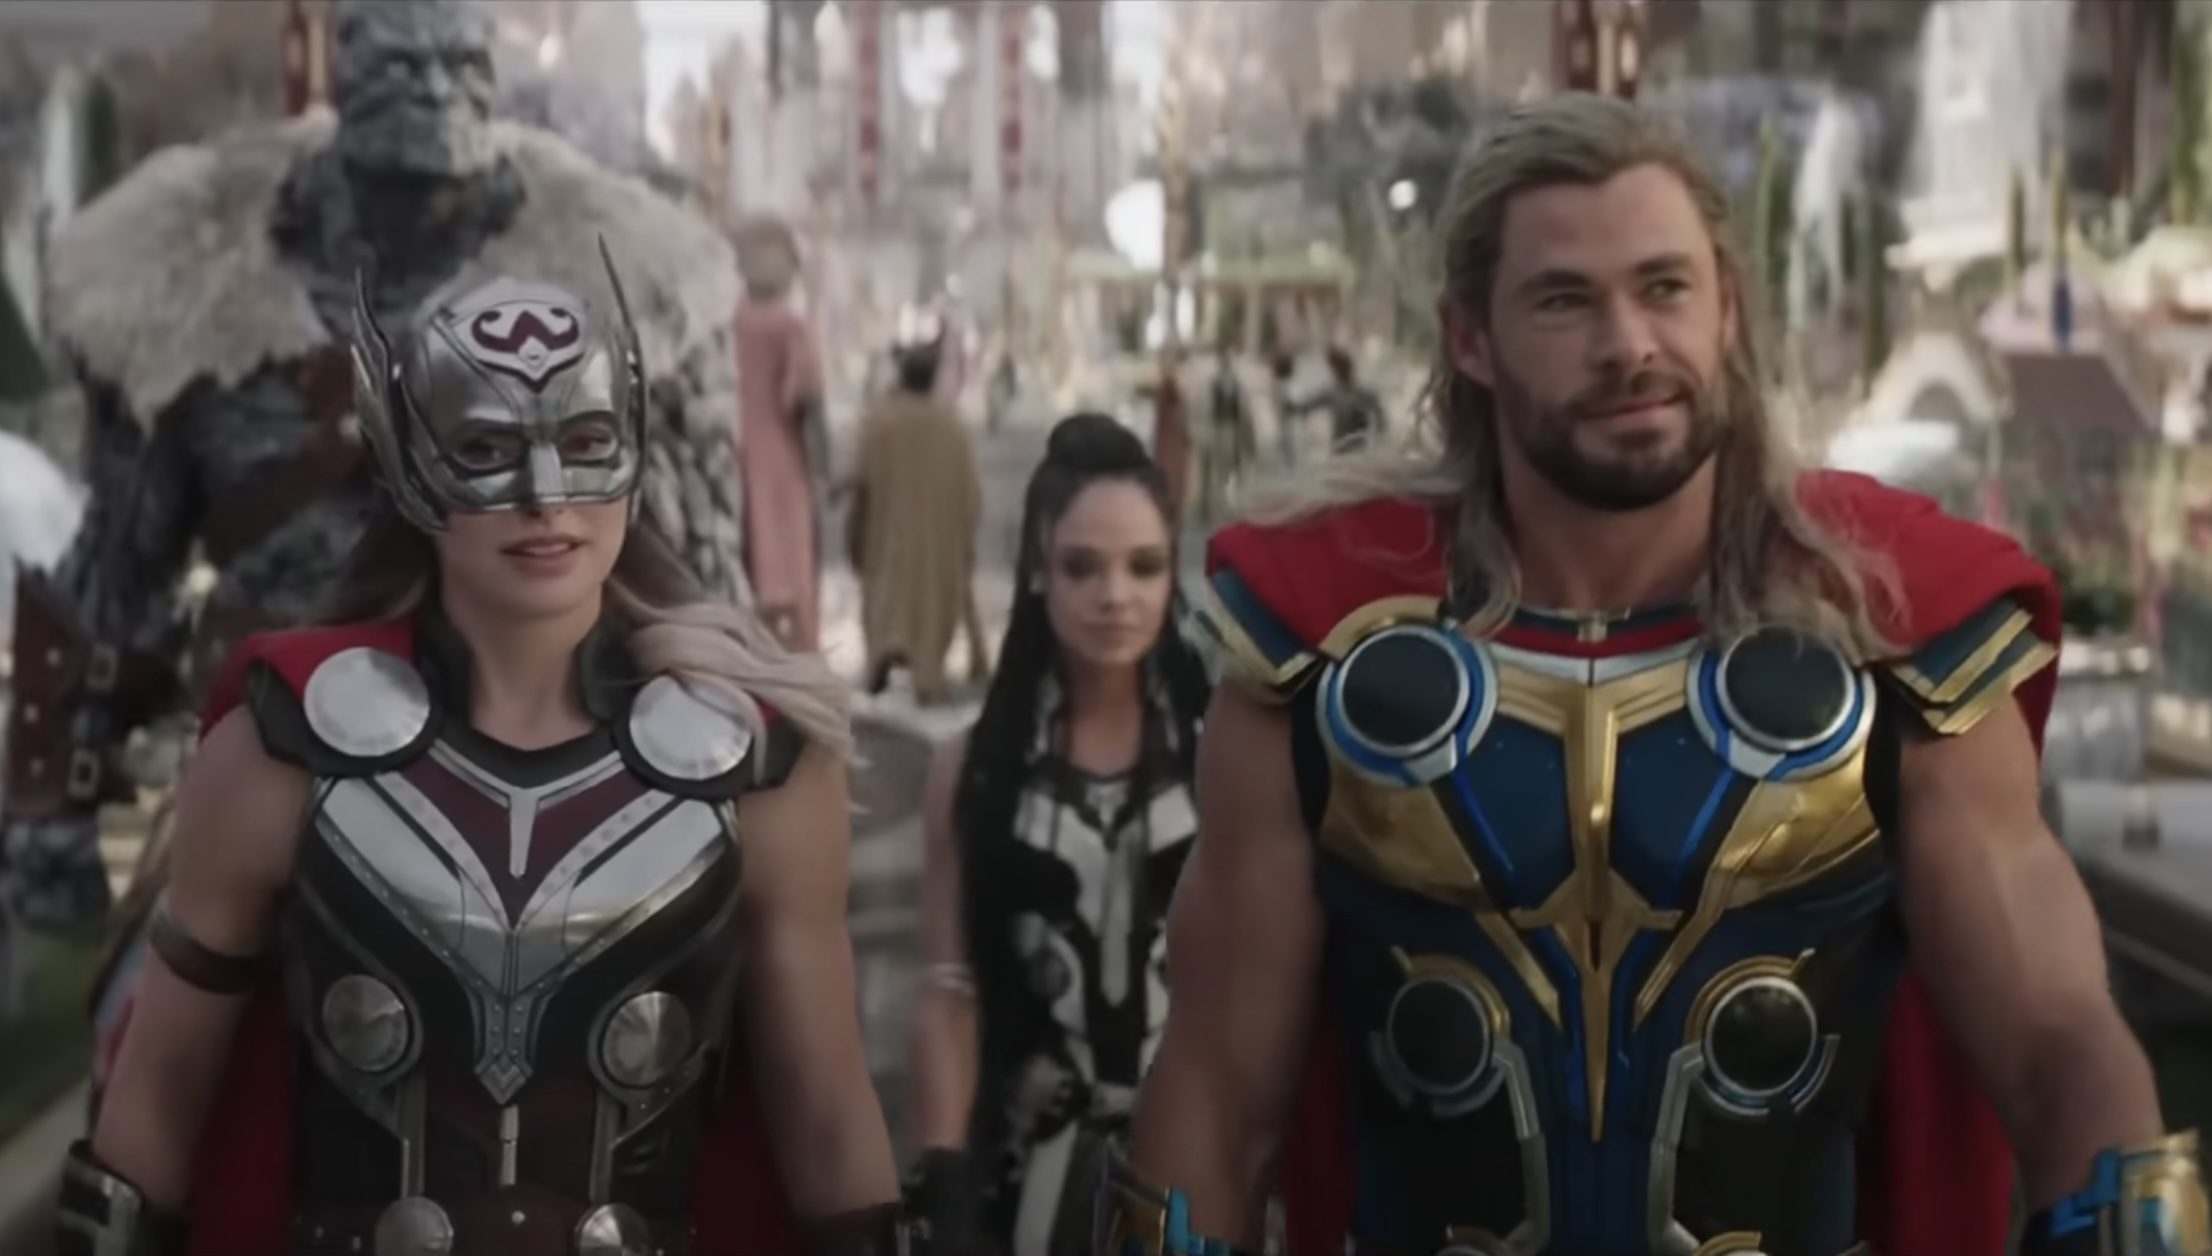 AVOID AT ALL COSTS: "Thor Love and Thunder" - Unless You Like Woke Movies Where Even the Rock People are Gay and Having Babies and The Queen is a "King" | The Gateway Pundit | by Jim Hᴏft